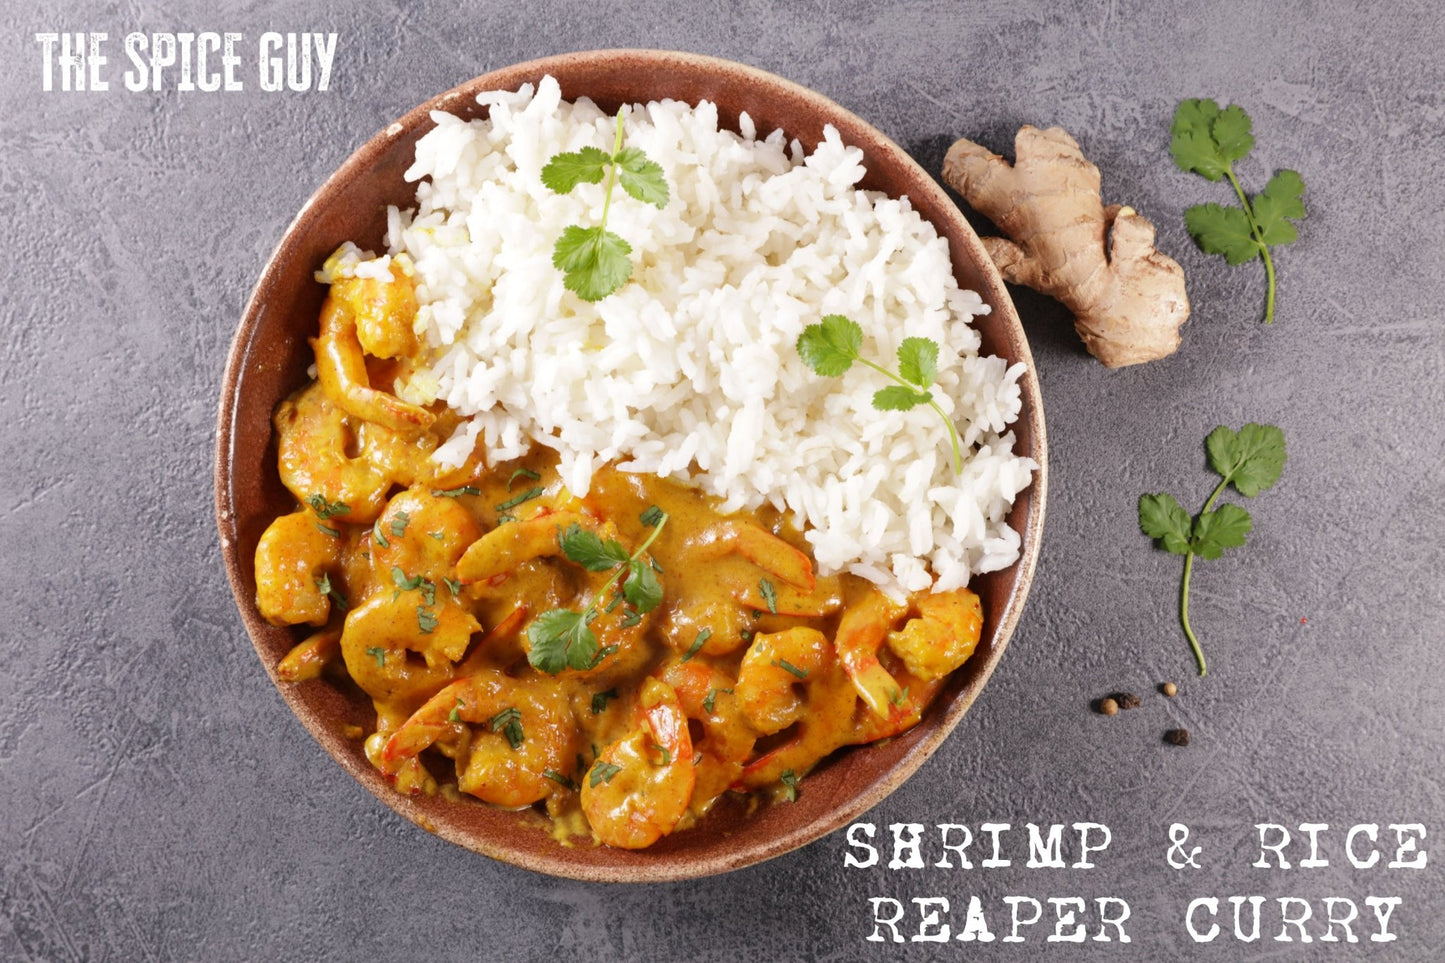 Shrimp & Rice Reaper Curry - The Spice Guy